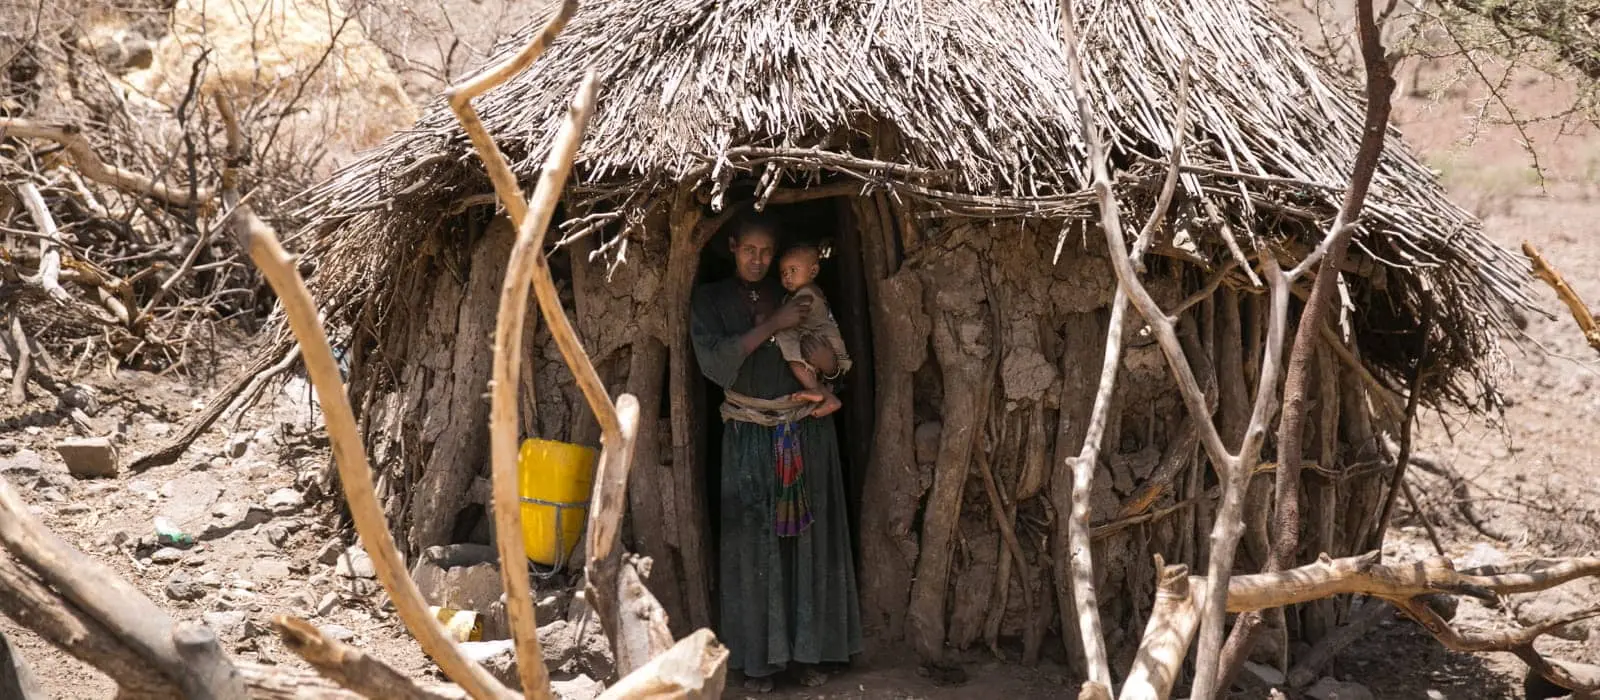 Woman and child stand in doorway of mud and thatch hut in barren Ethiopan landscape